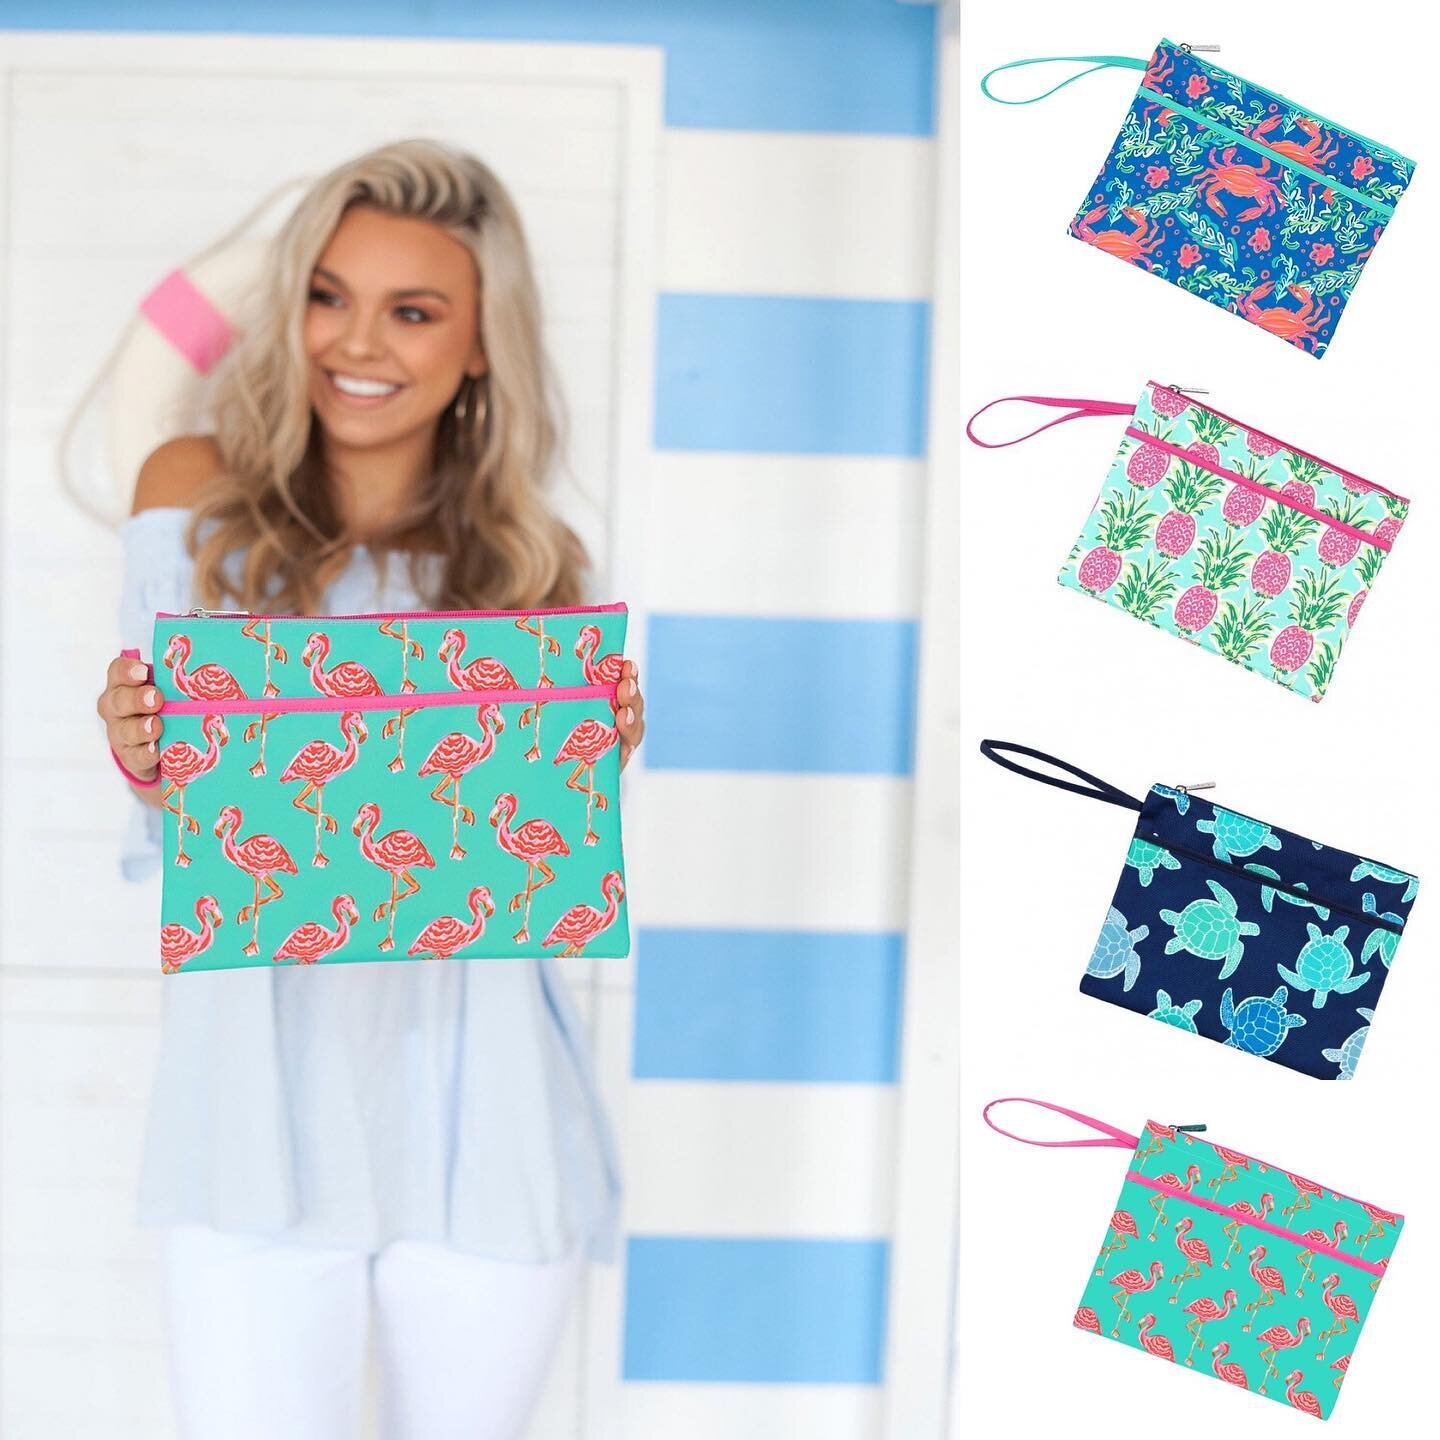 Wristlets!  Are oversized wristlets that are PEVA lined perfect for the beach, boating, camping, or the pool - 2 Compartments you can certainly put wet items in!  Or go out for the evening with a stylish and pop of color accessory!  Available in 7  b